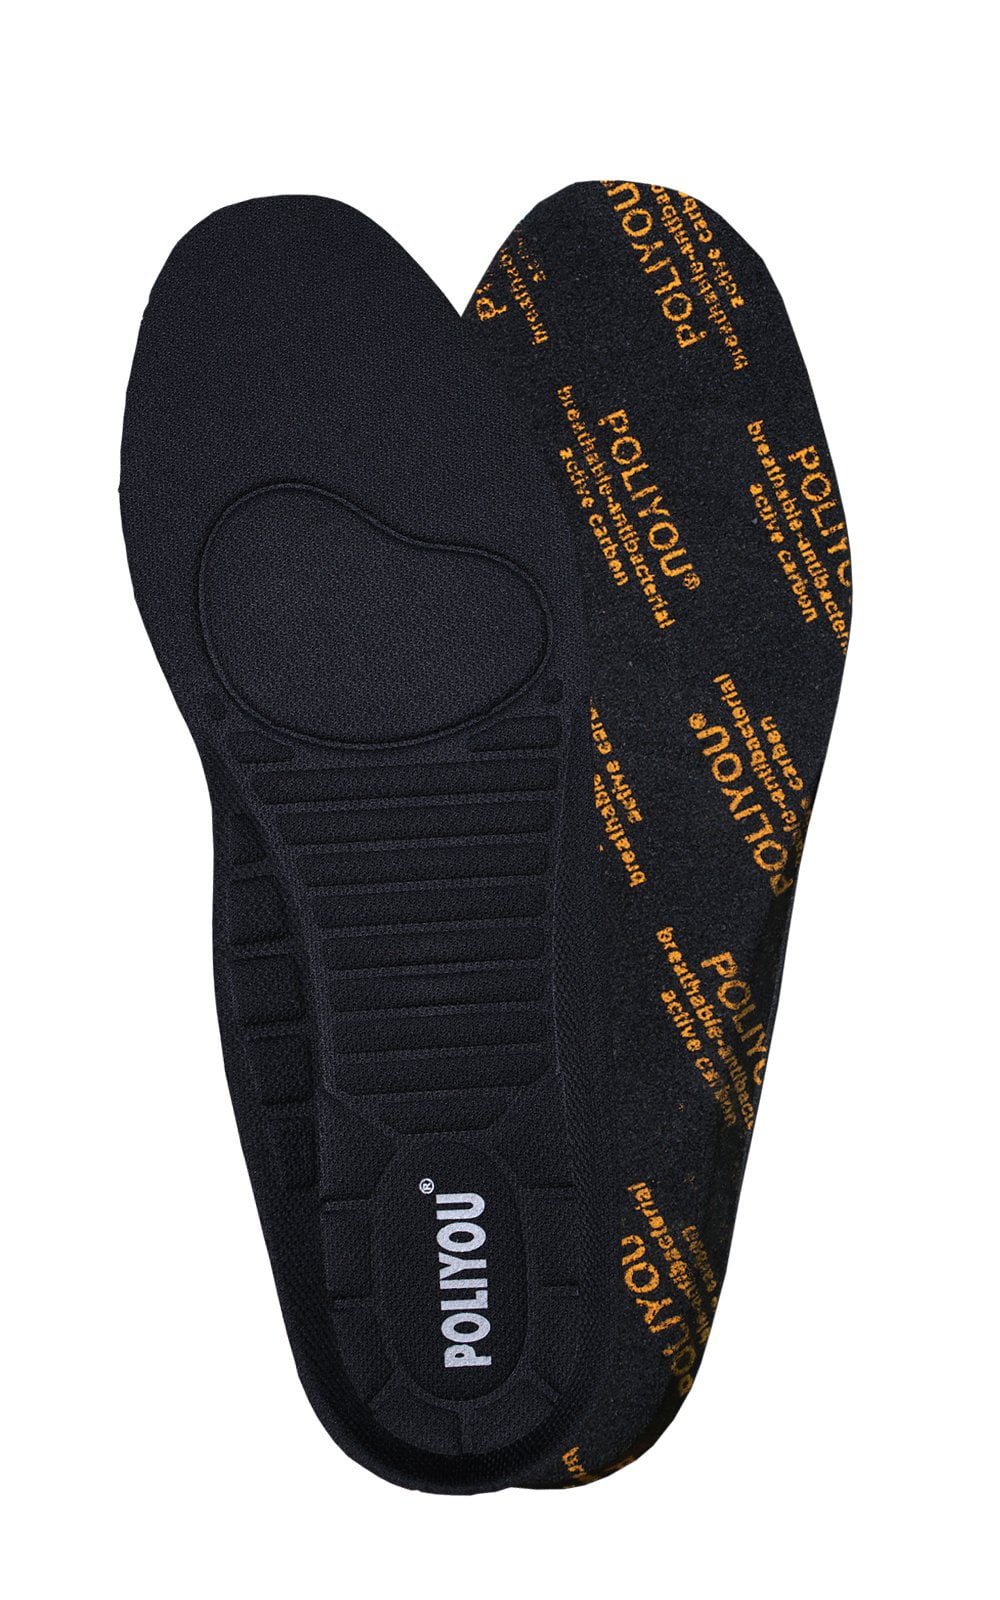 Kaps Roadway Comfortable shoe insoles for sneakers and casual footwear with biomechanical shape 